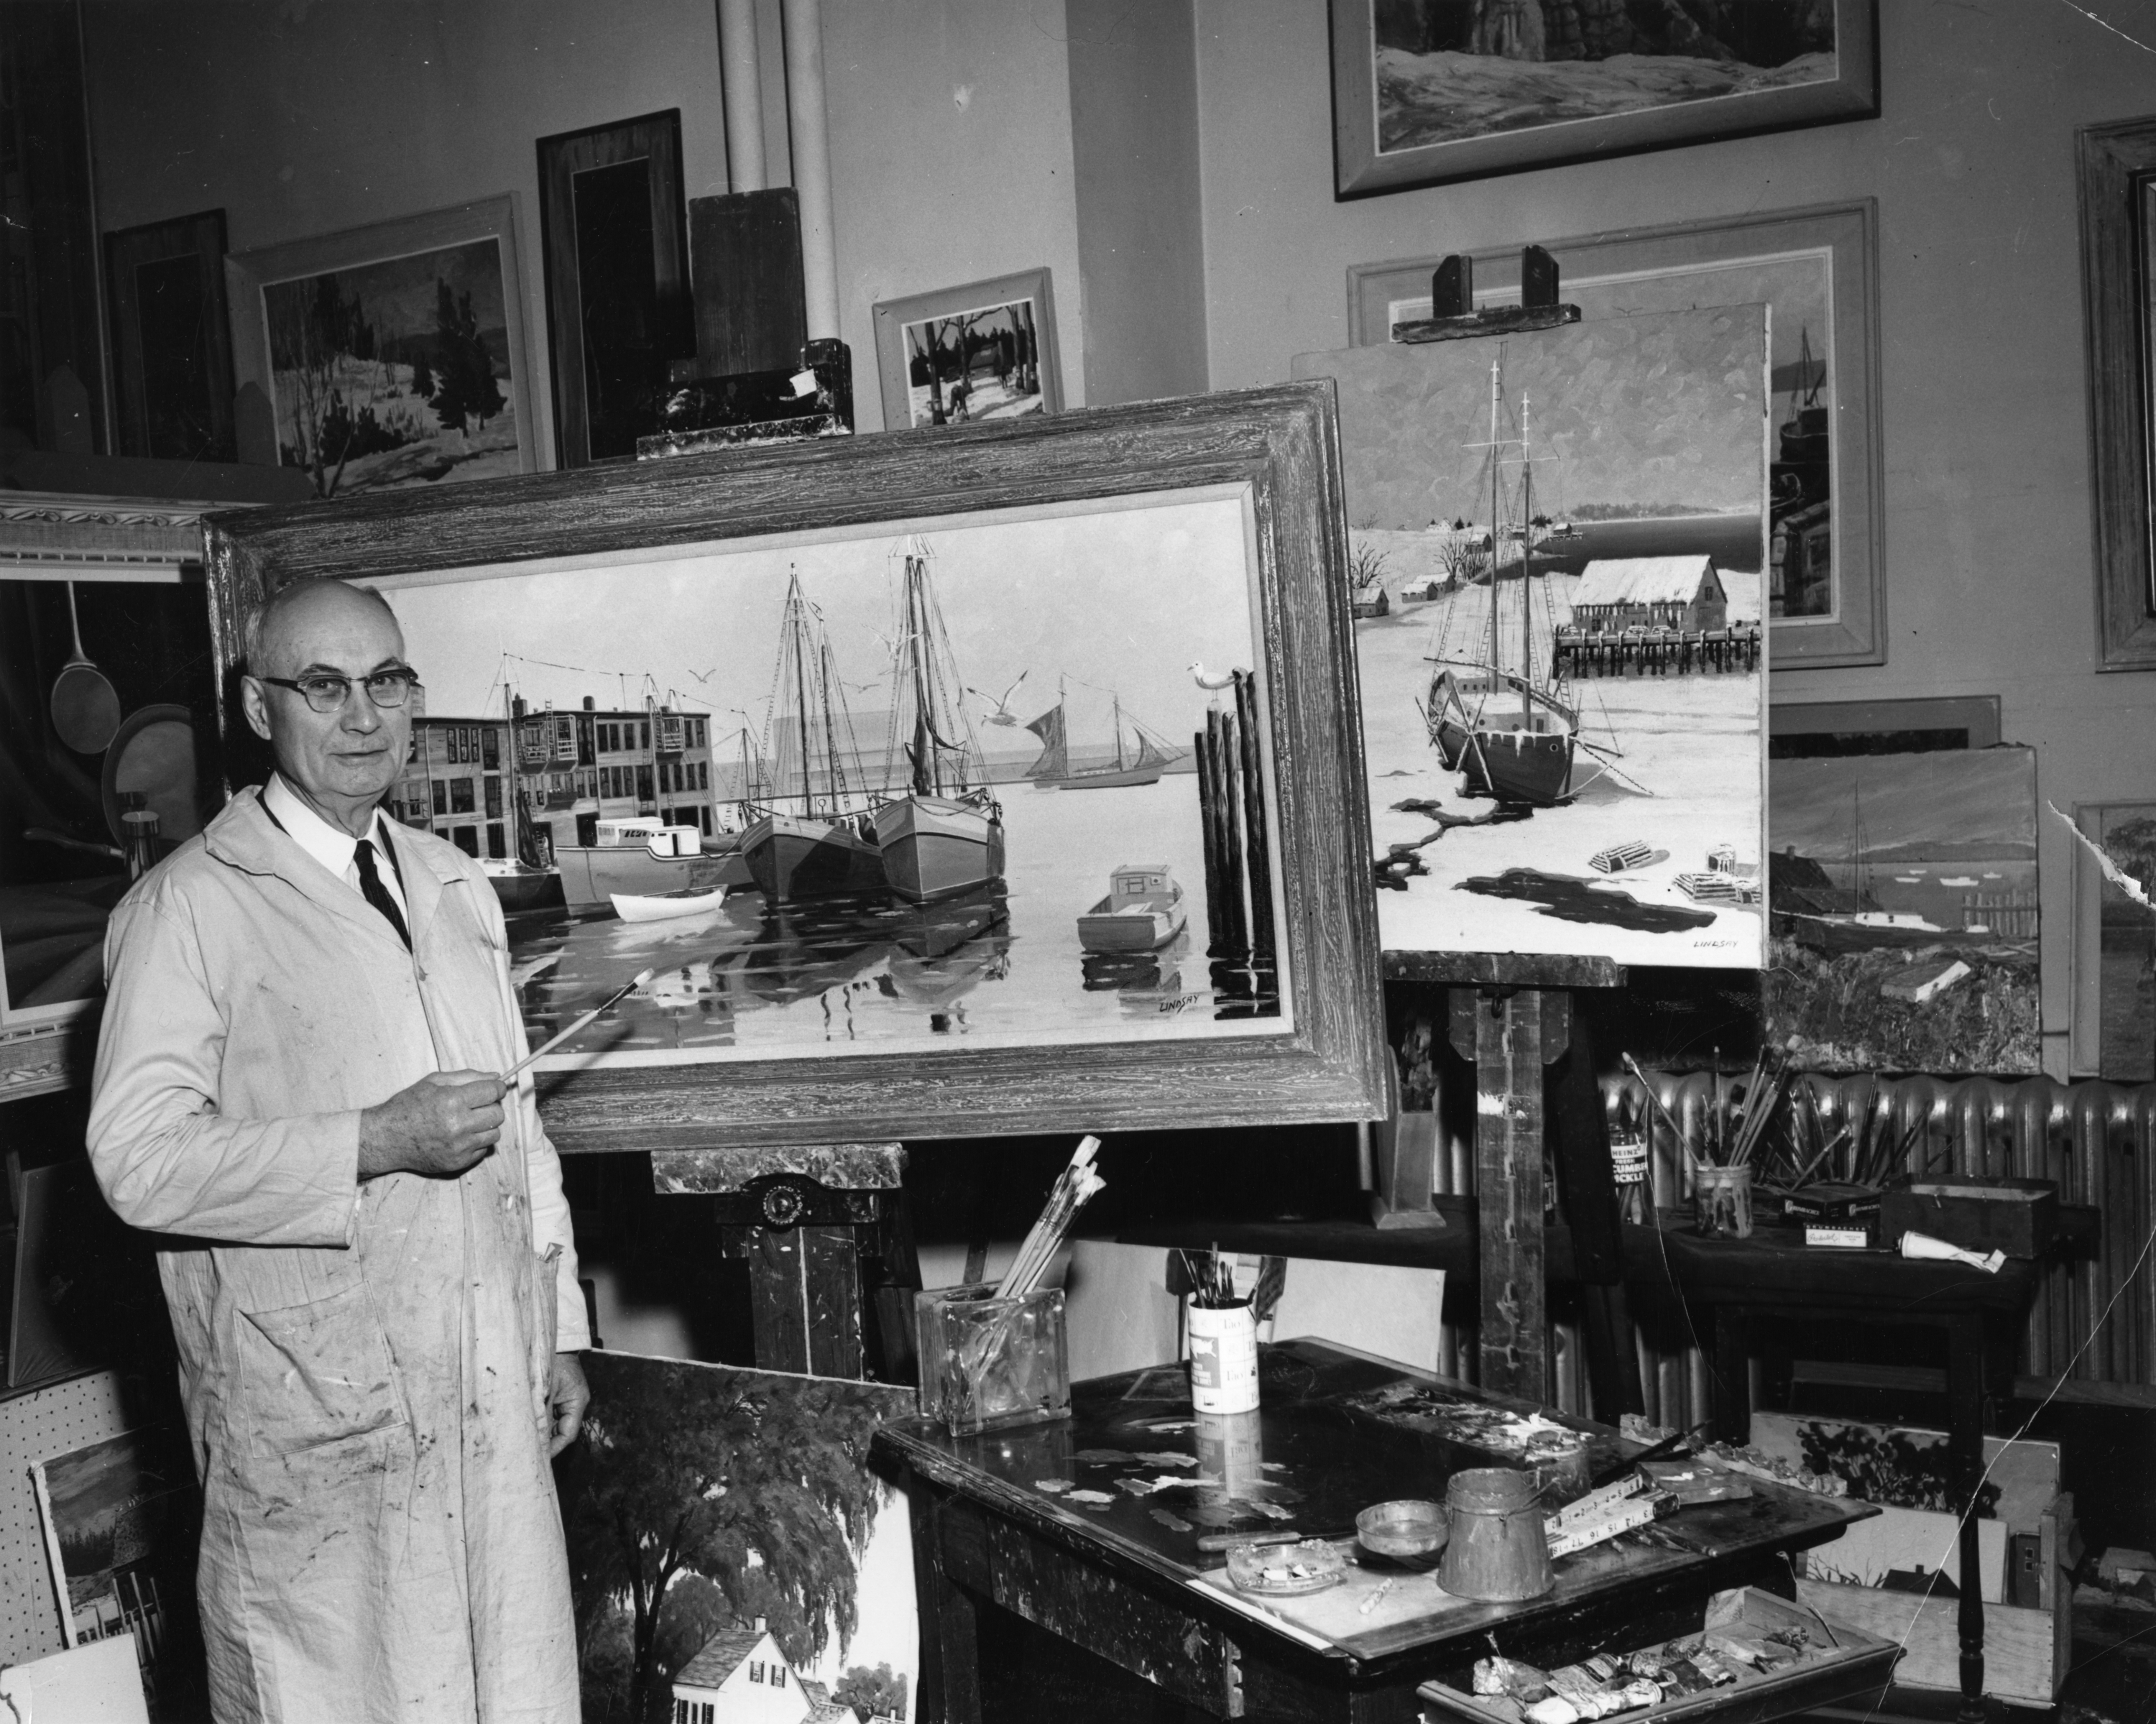 Maurice Lindsay in his art studio with paintings on easels in background